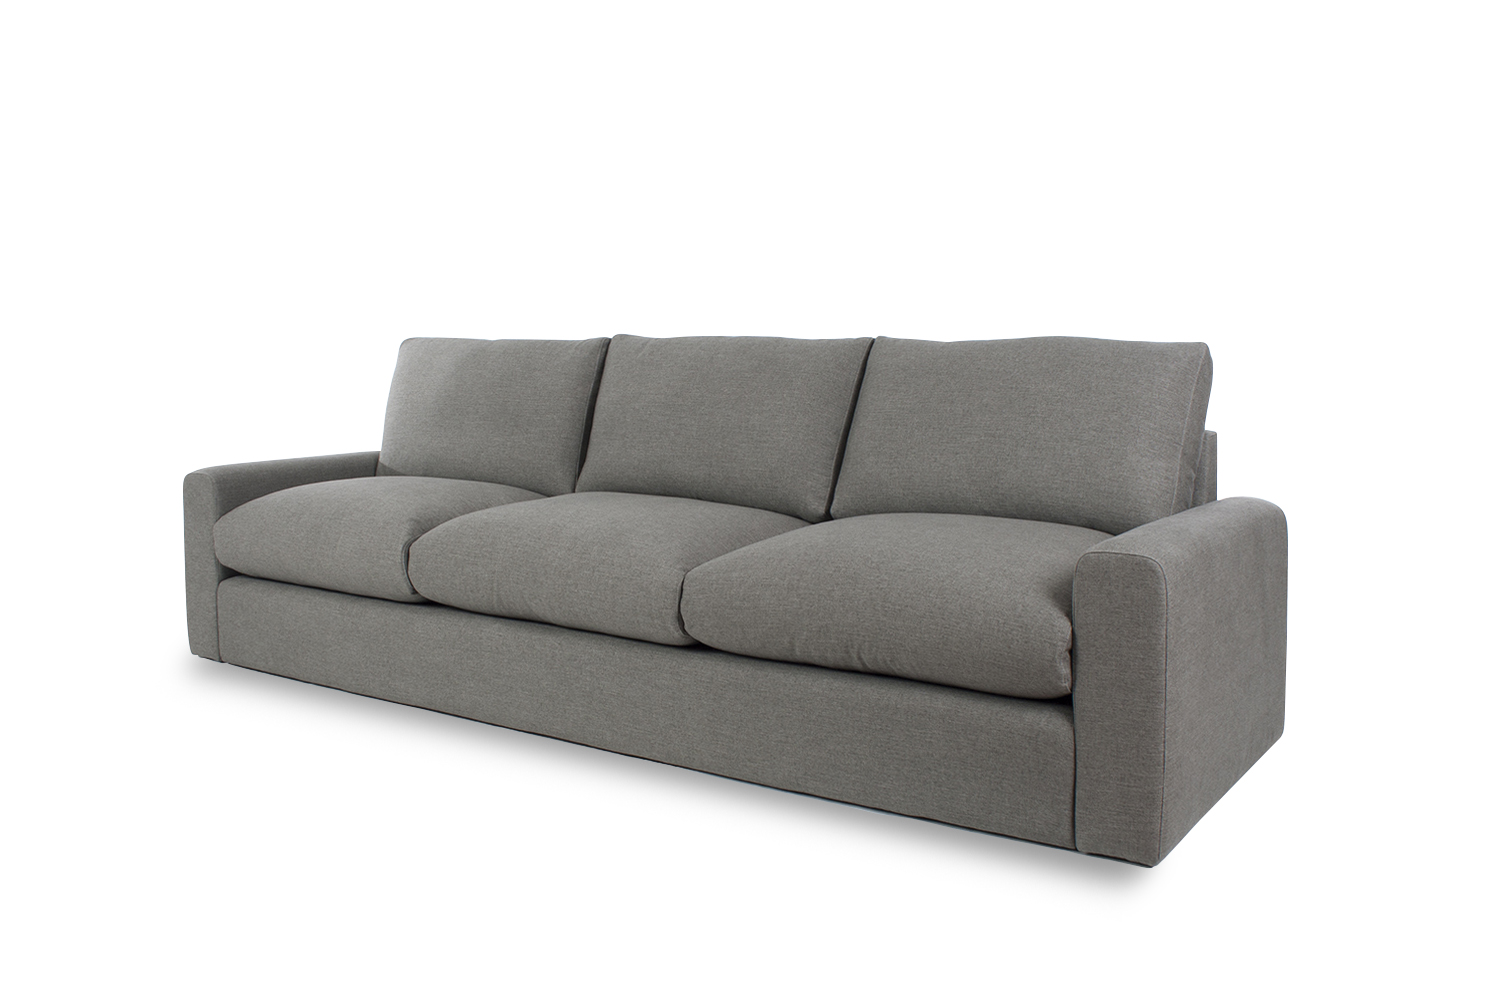 Crearte Collections Sofa Big Mamma Upholstered 1